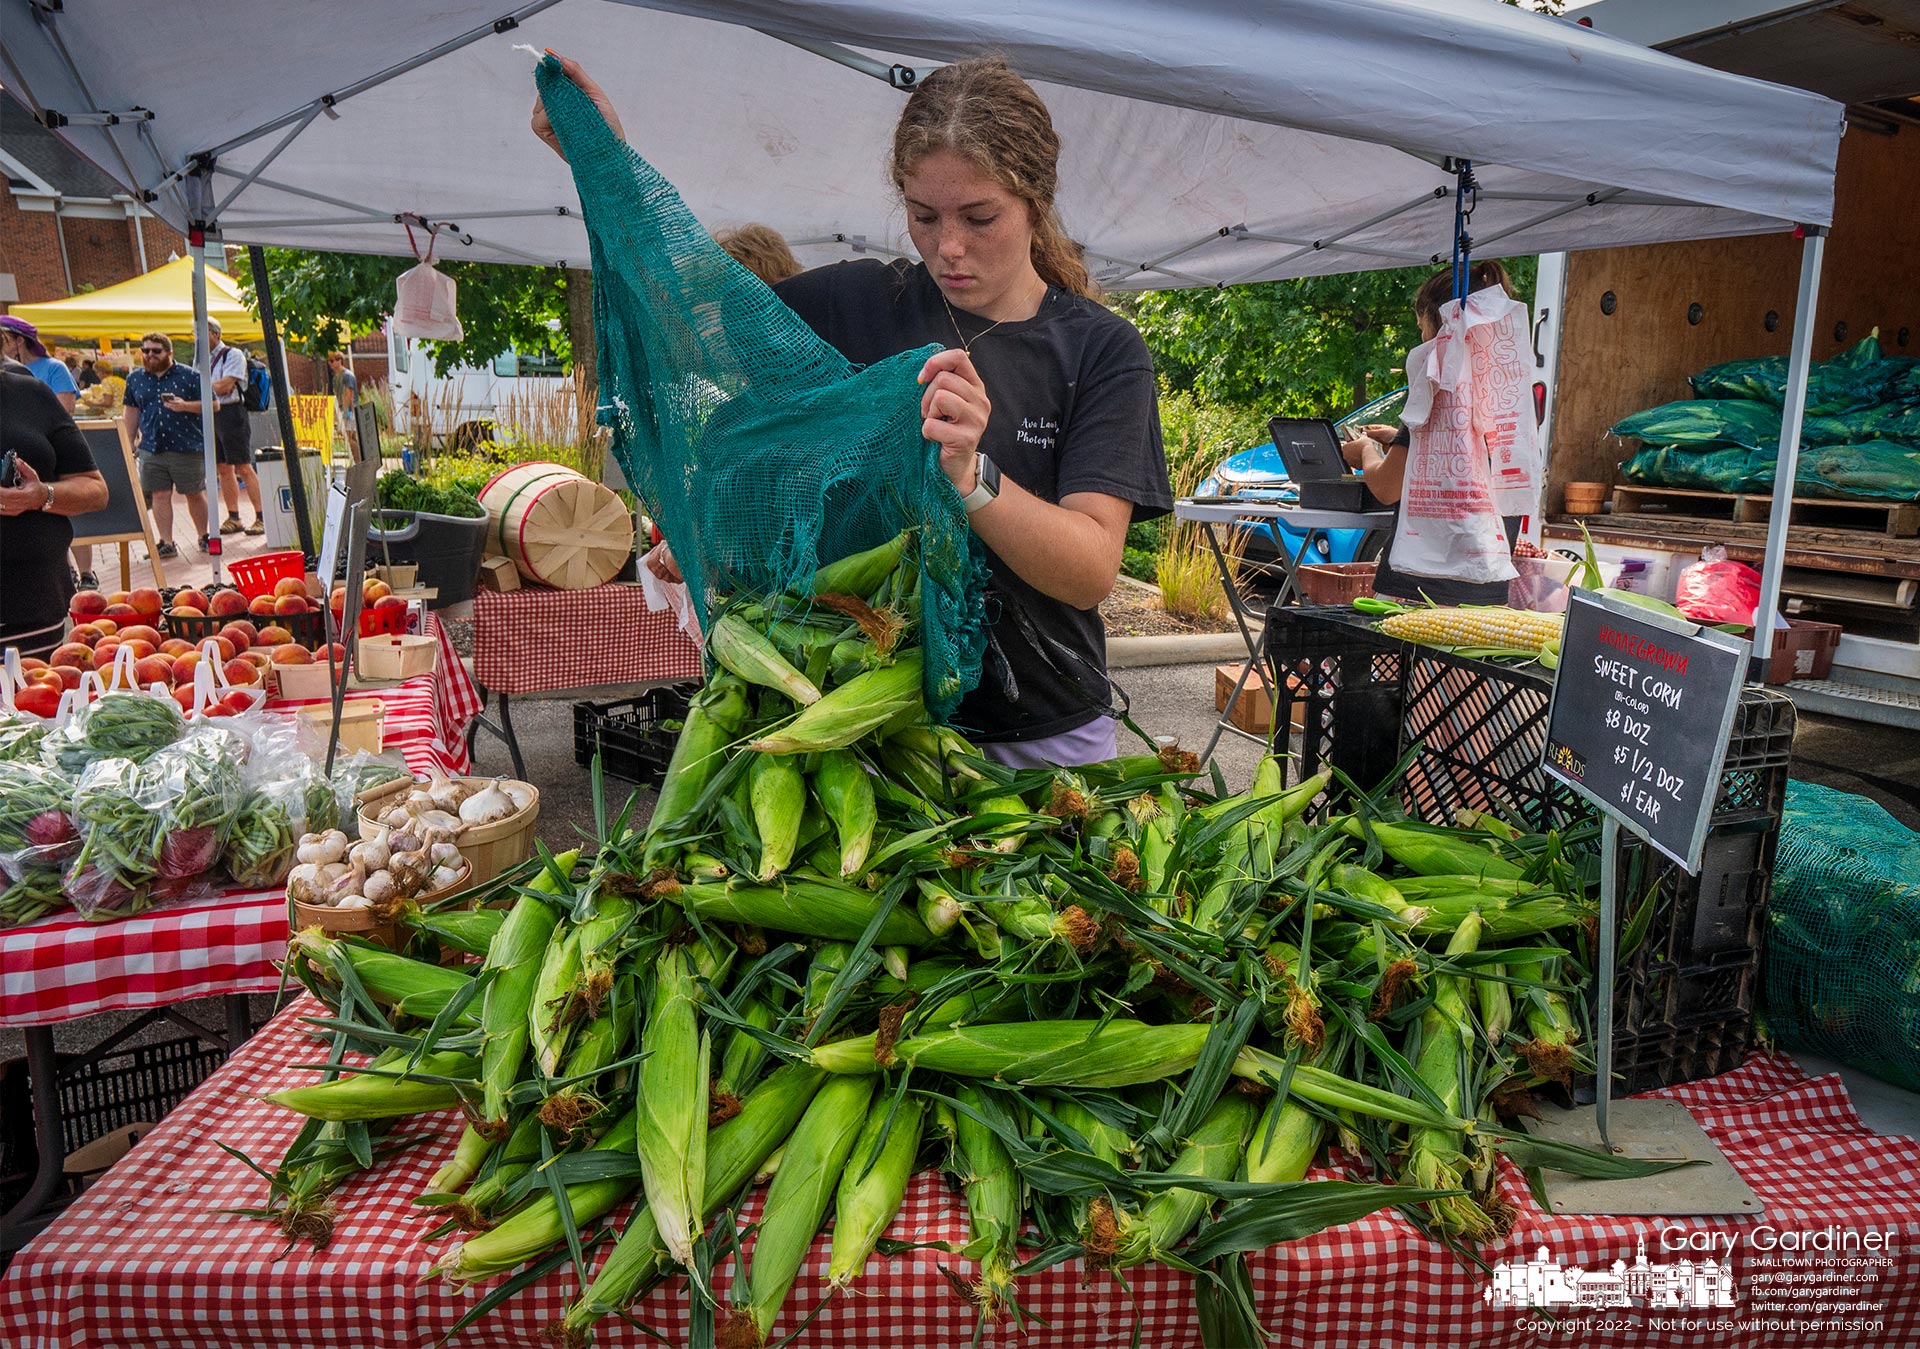 First of the season fresh corn is dumped on a table at the Rhoads Farm tent bringing another summer vegetable feast item to the Saturday Farmer's Market. My Final Photo for July 9, 2022.